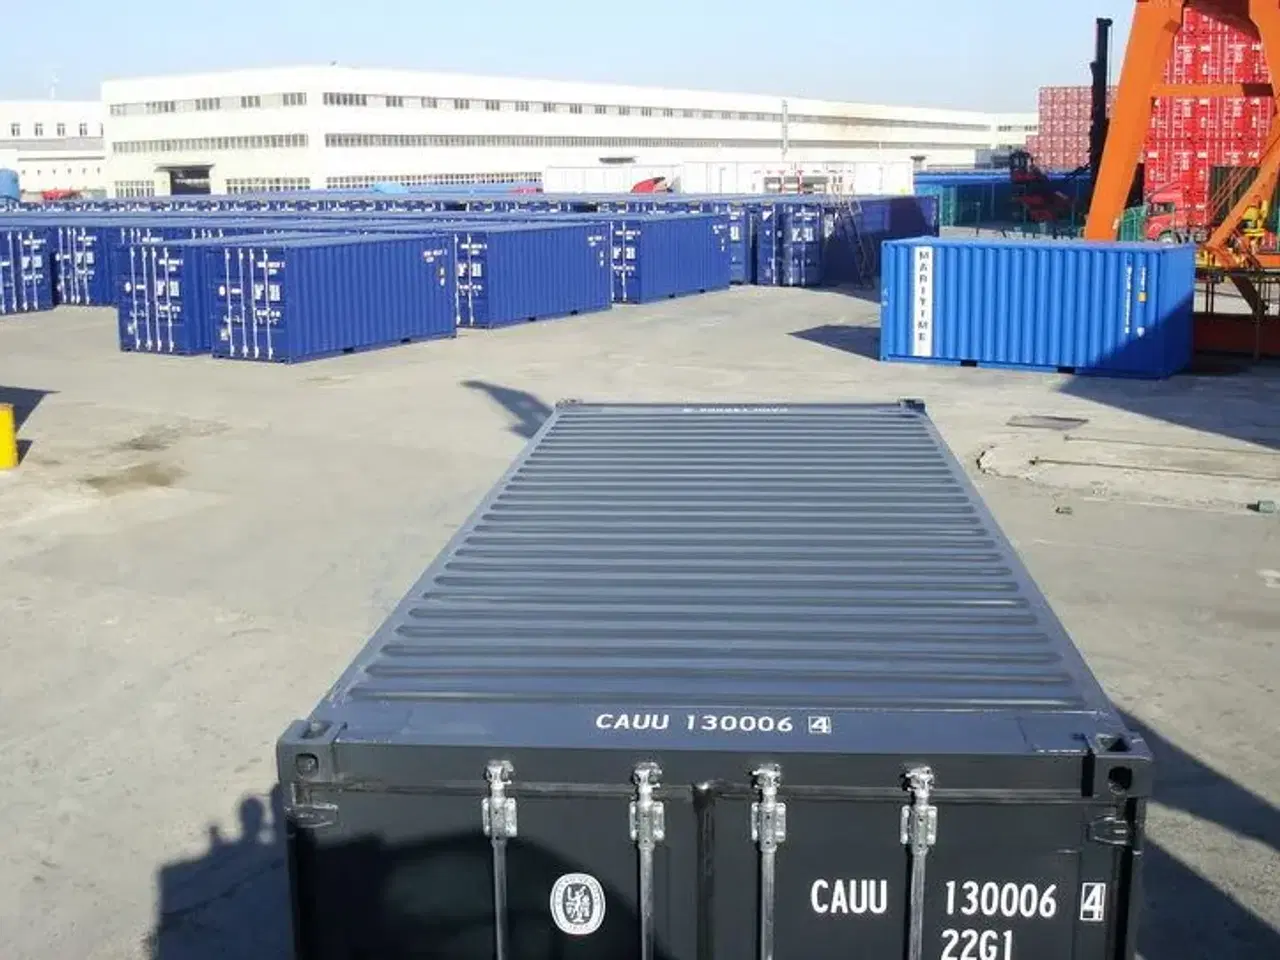 Billede 3 - Ny 20 fods container